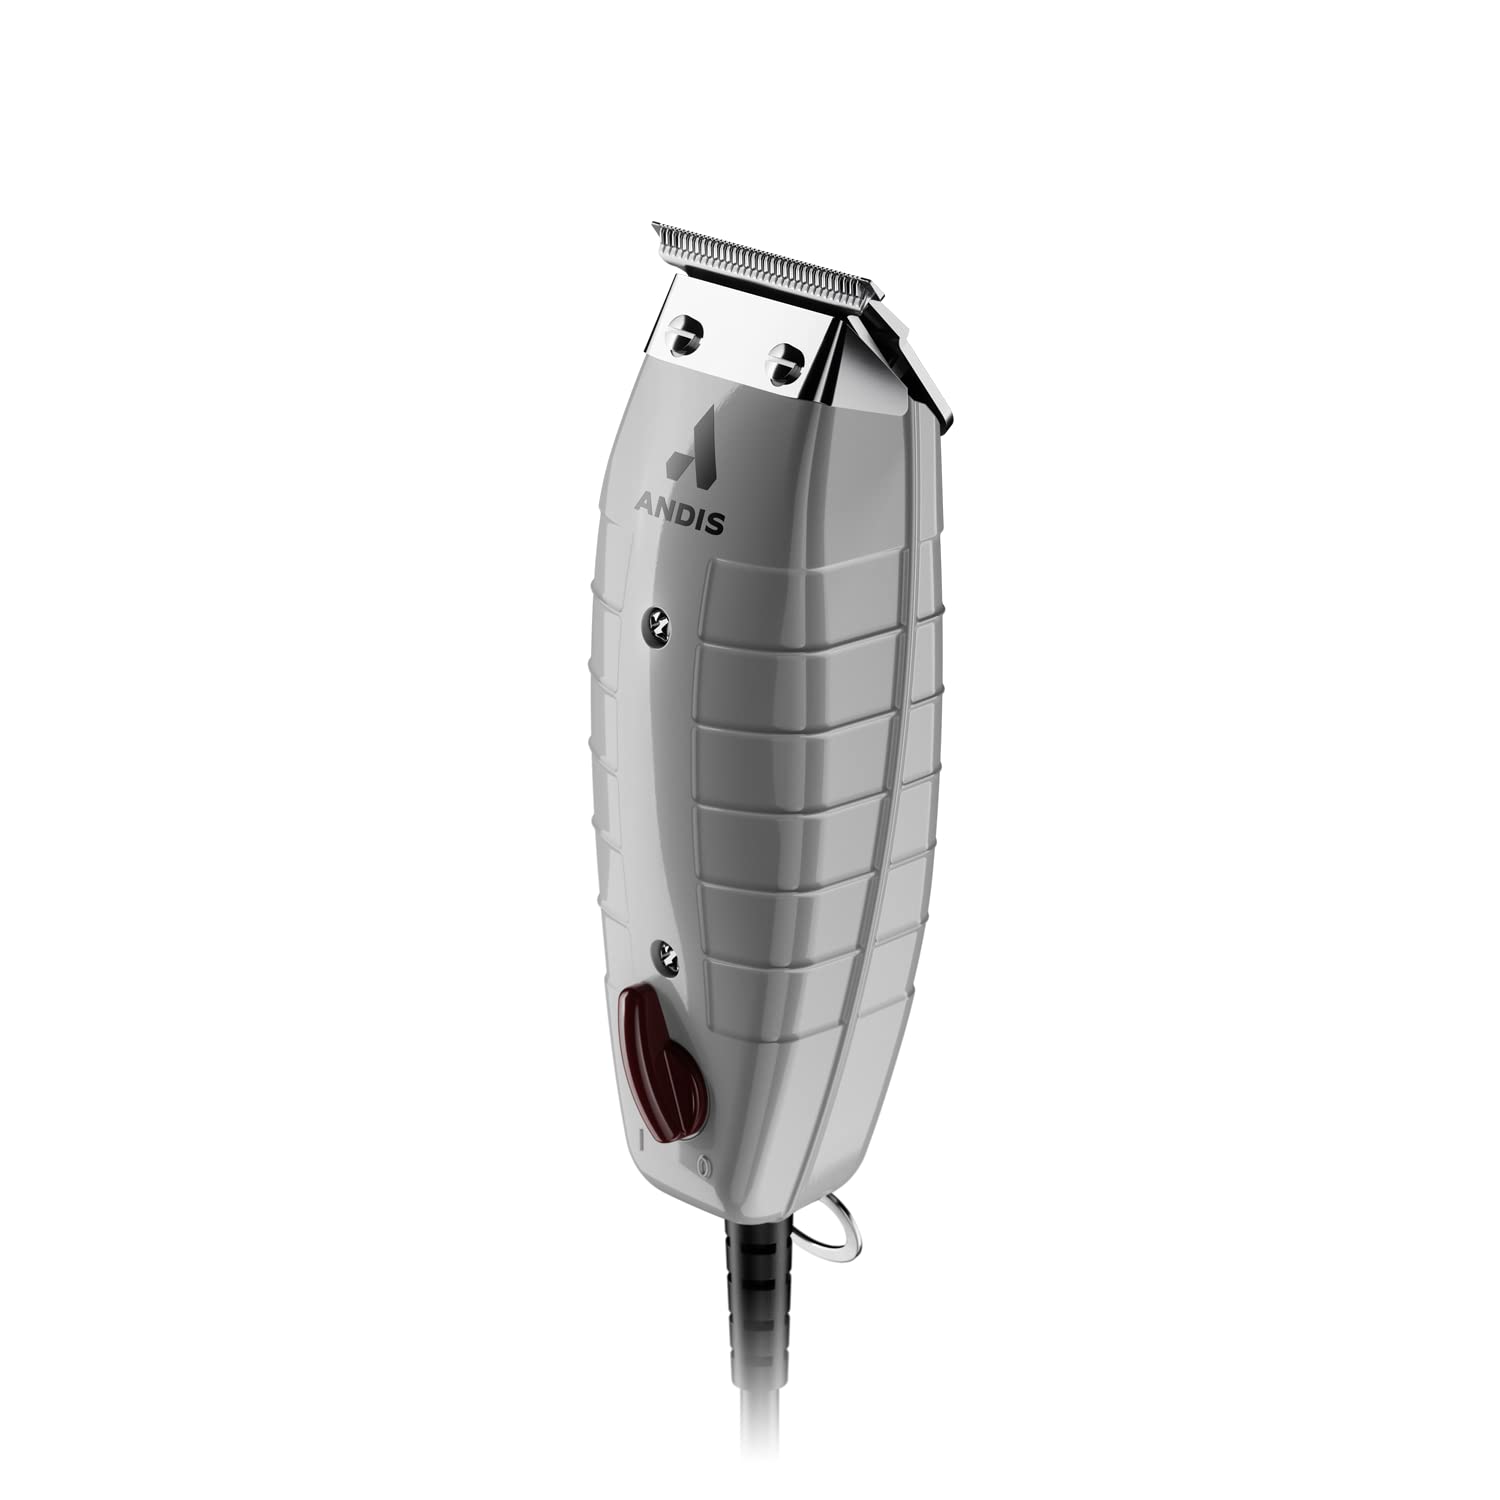 Andis 04780 Professional T-Outliner Beard & Hair Trimmer for Men with Carbon Steel T-Blade, Bump Free Technology – Corded Electric Beard Trimmer - Grey